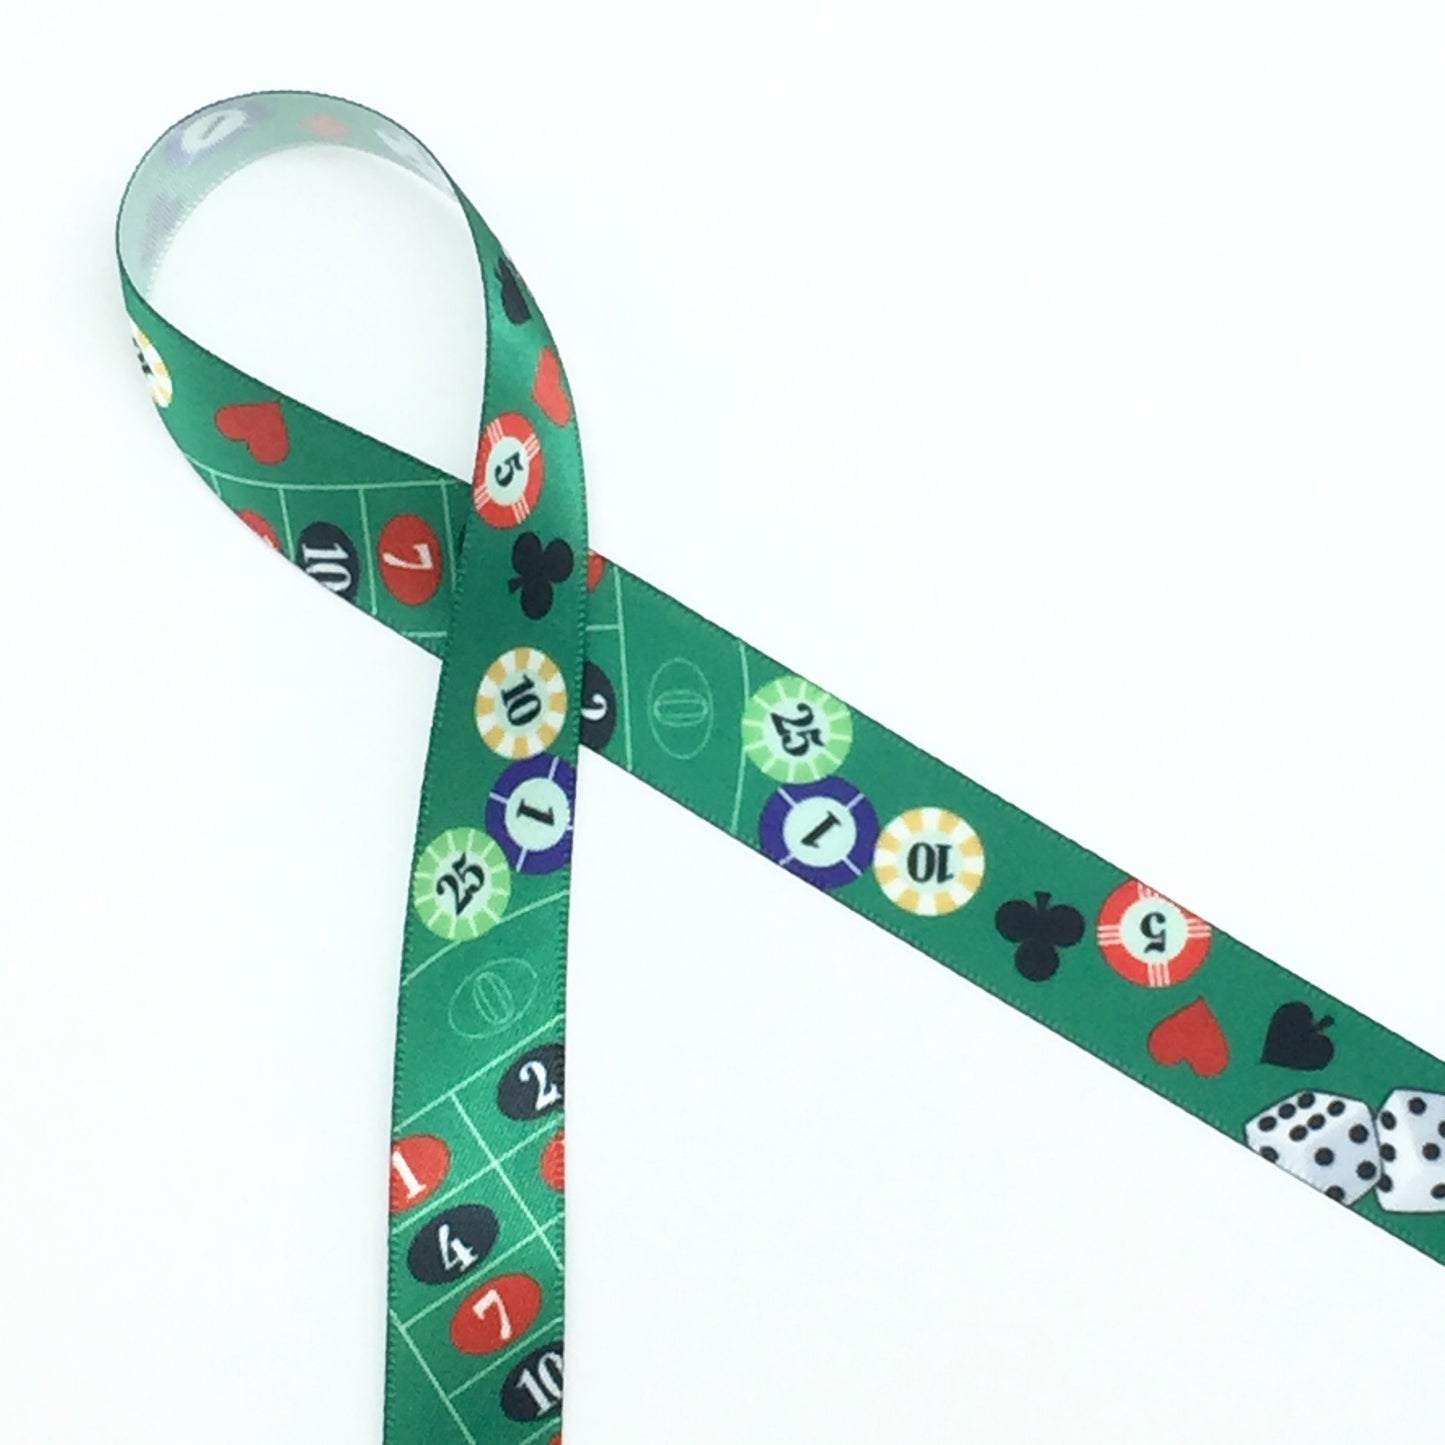 Casino Theme Ribbon with chips, dice, playing card suites and table games on a green background printed on 5/8" and 7/8" white satin